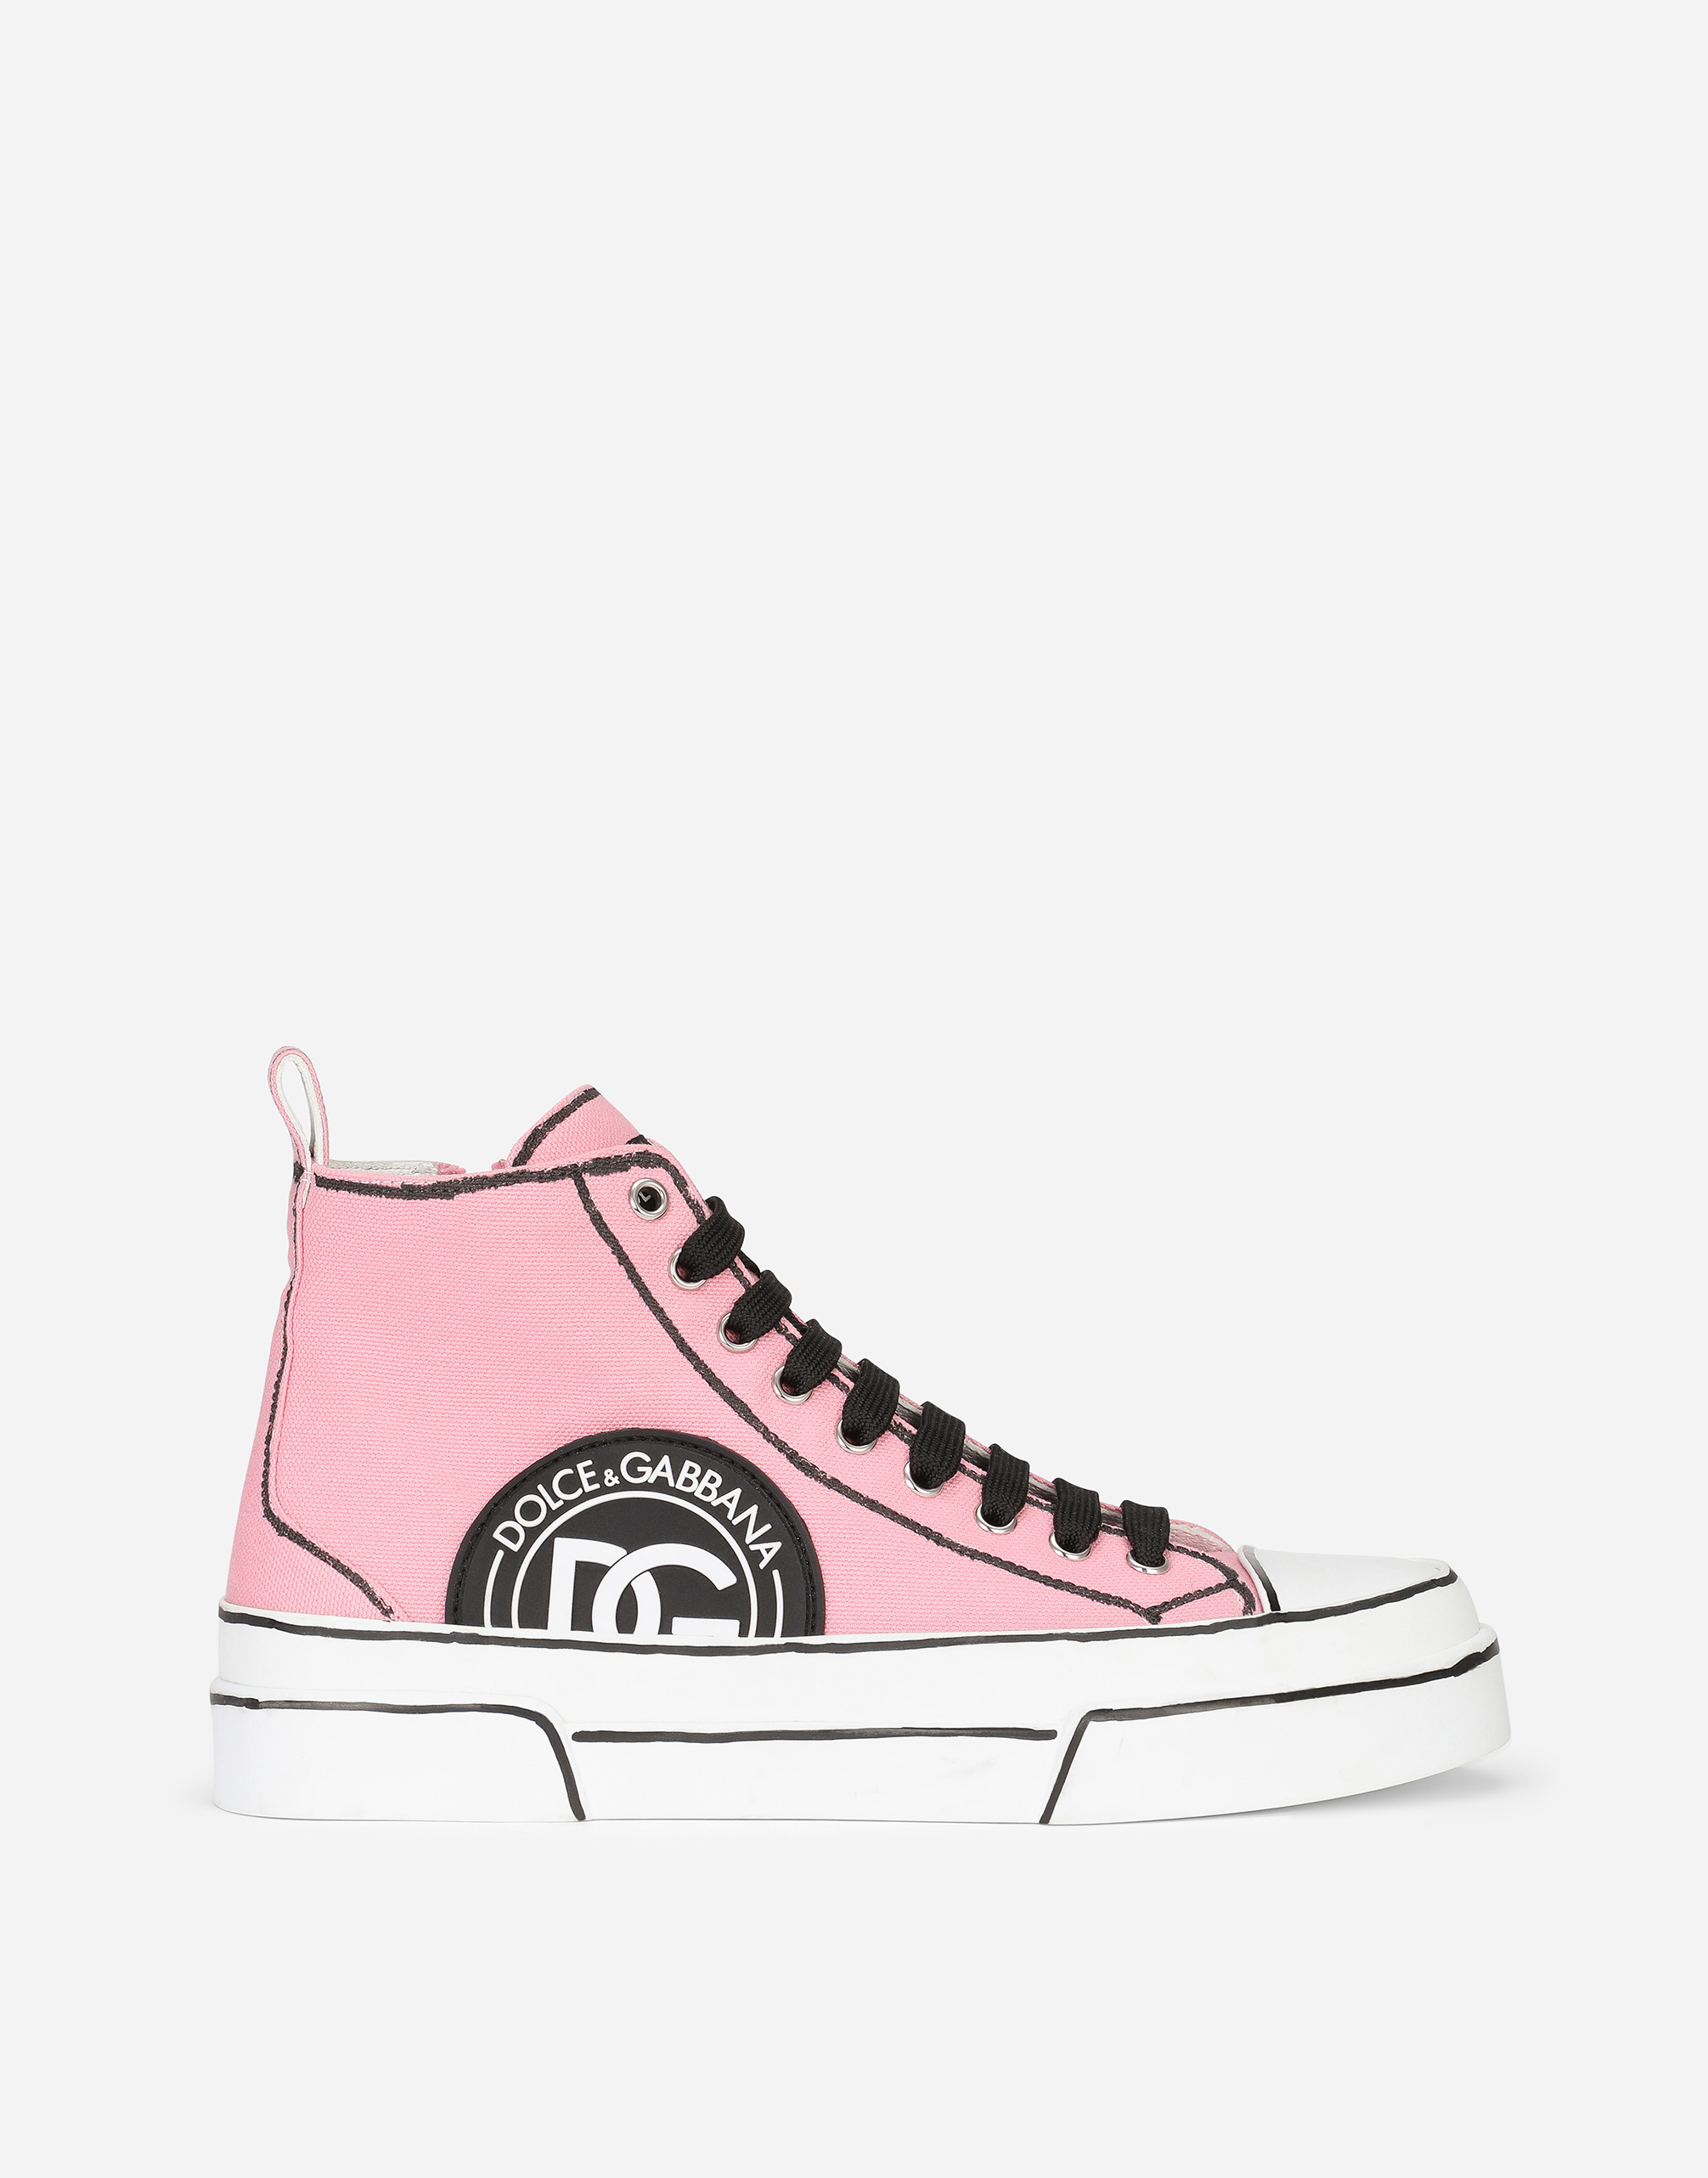 Hand-painted canvas Portofino Light mid-top sneakers in Pink